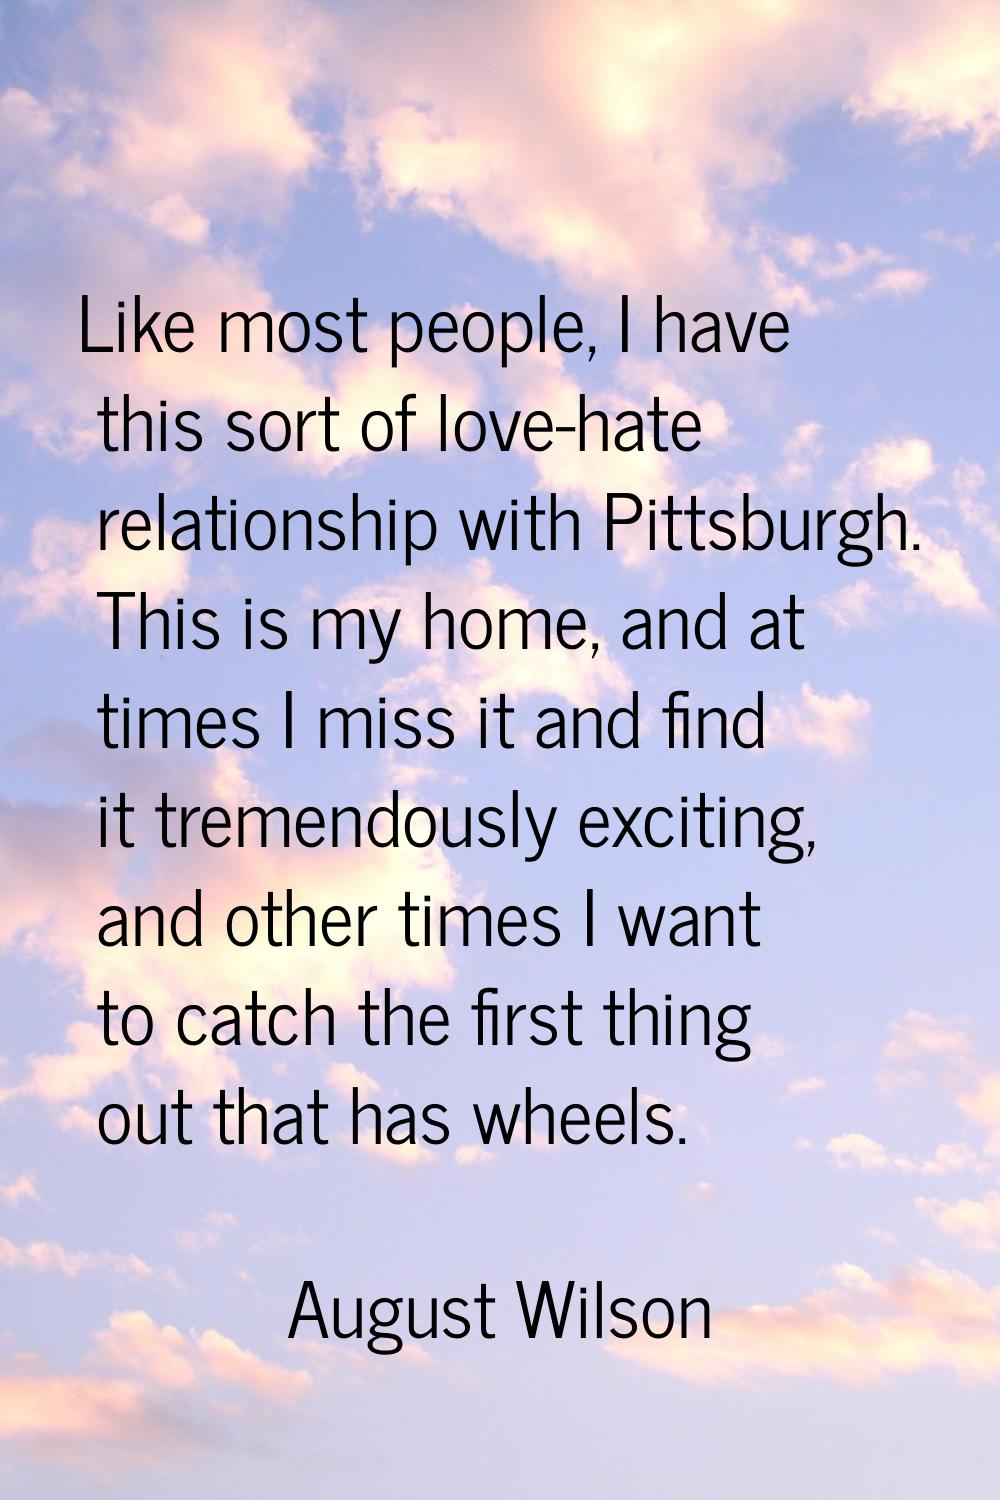 Like most people, I have this sort of love-hate relationship with Pittsburgh. This is my home, and 